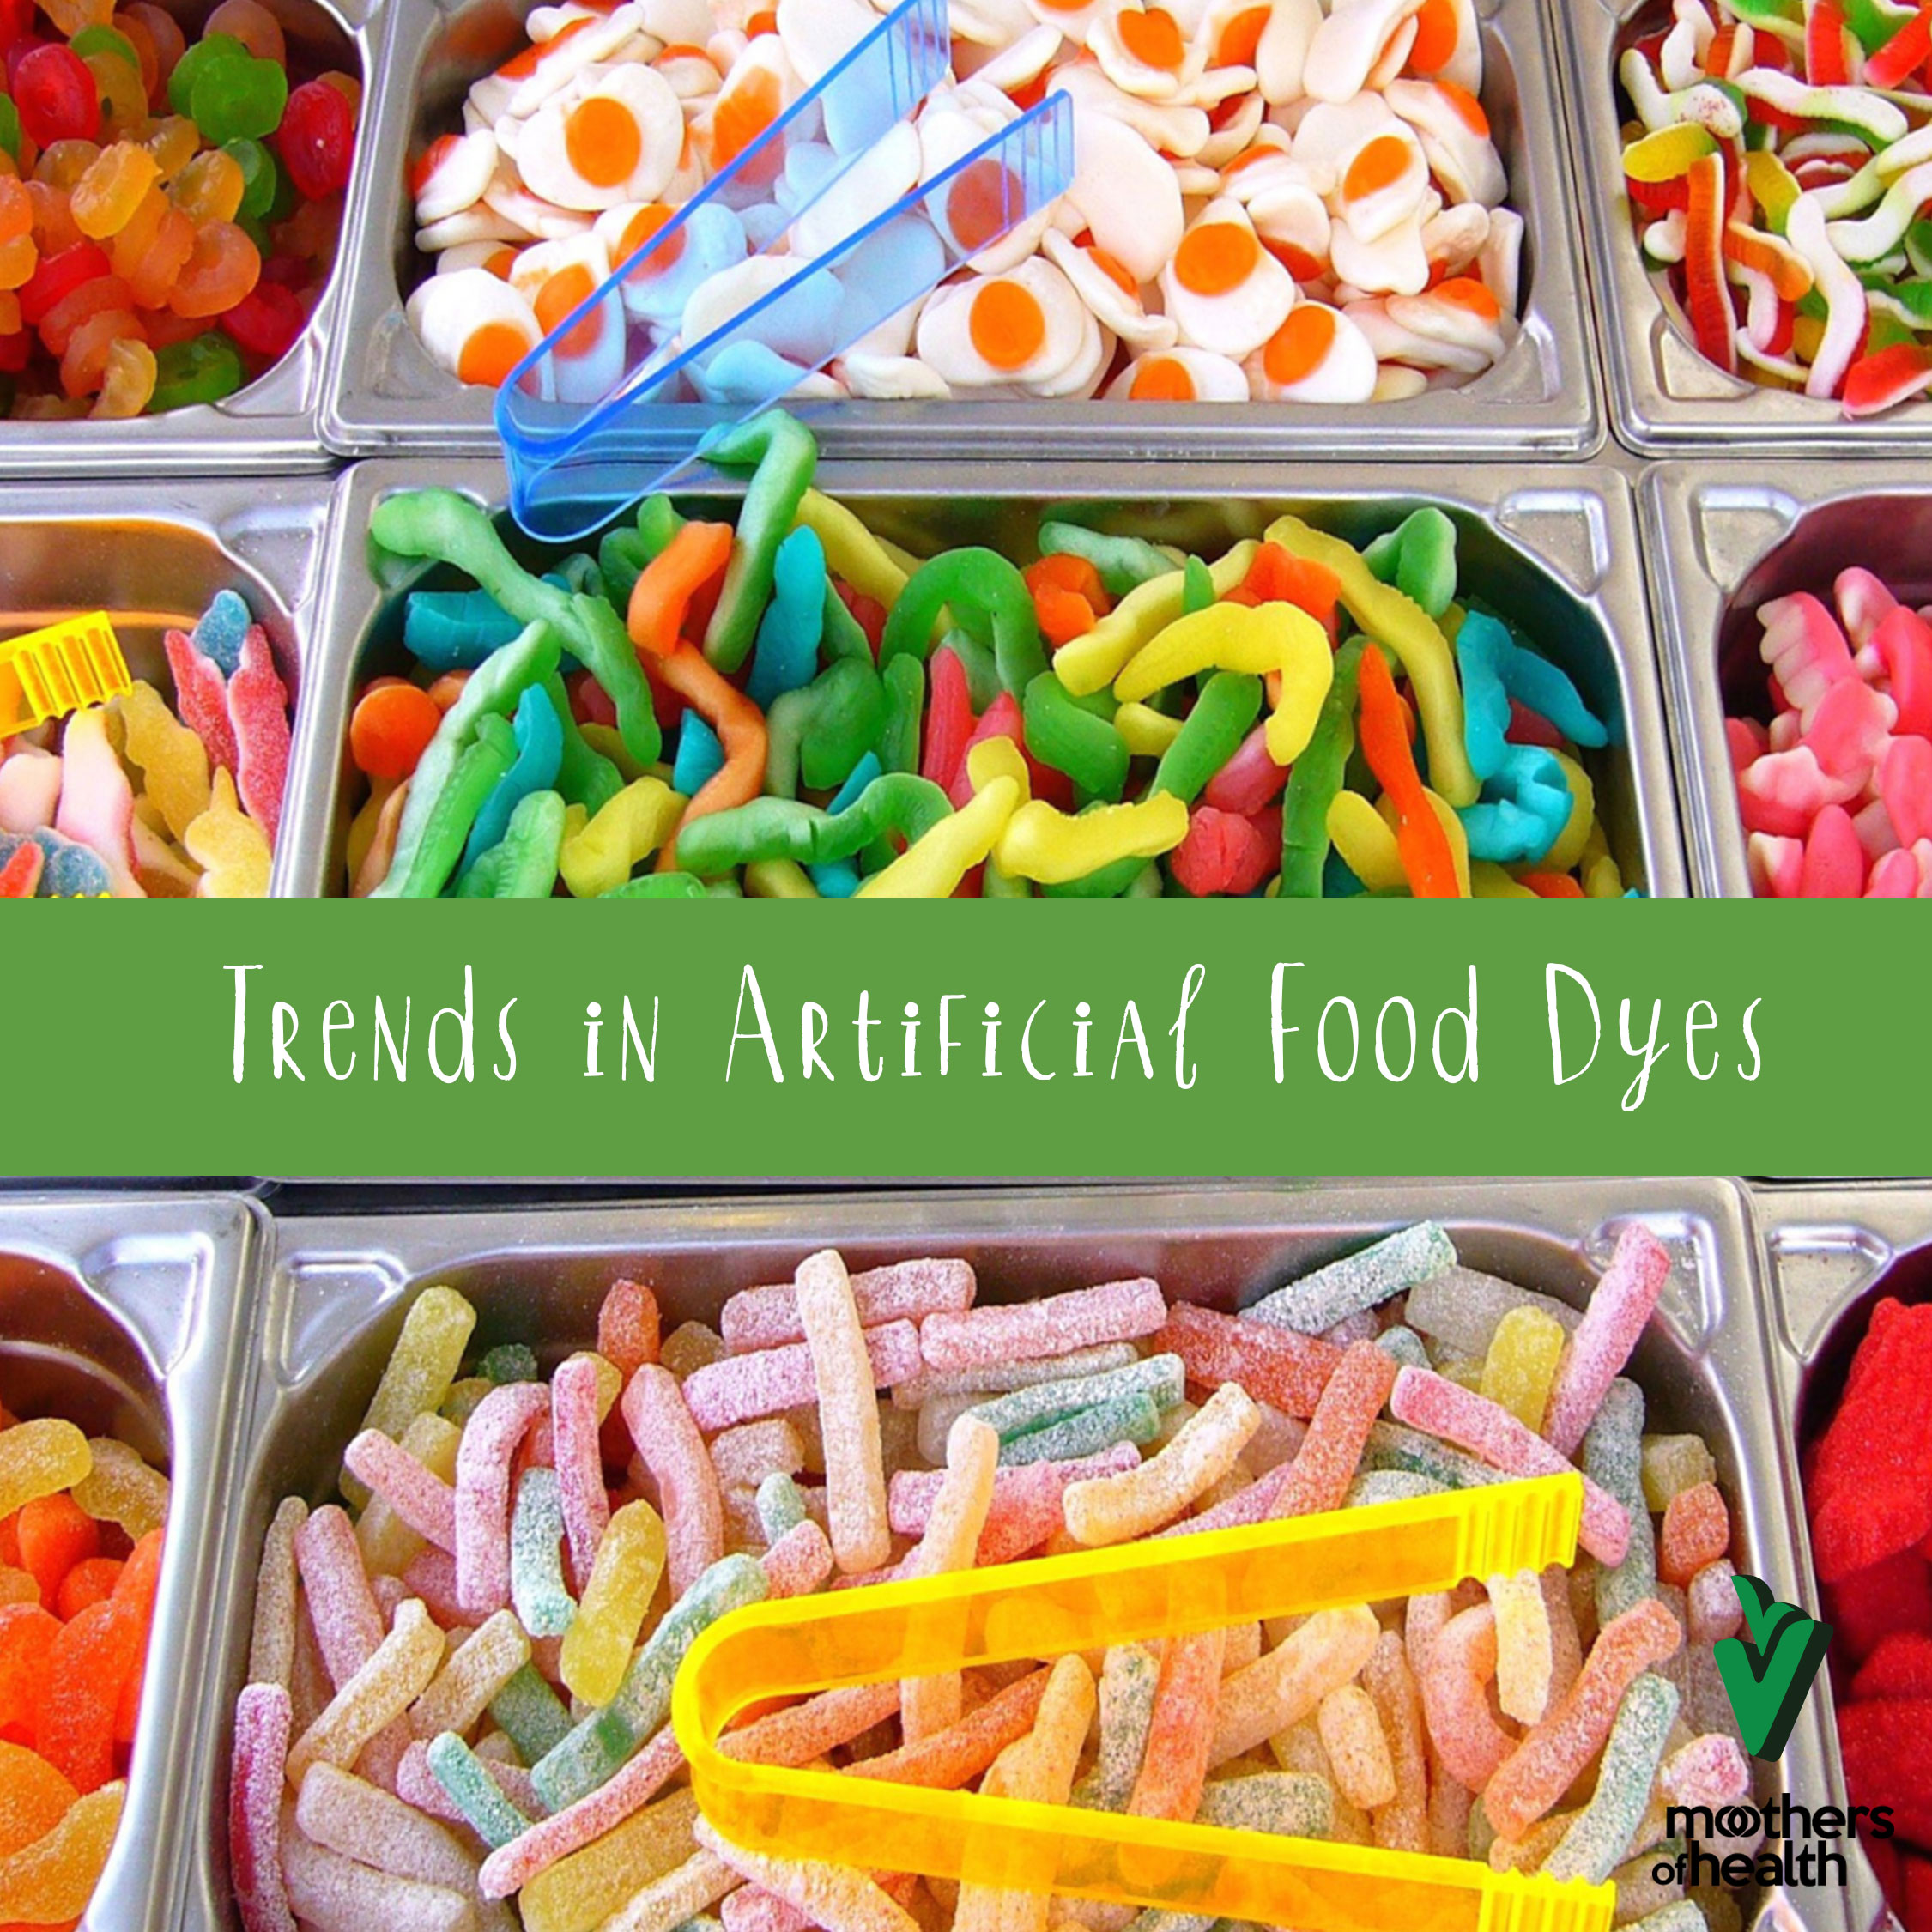 Trends in Using Artificial Food Dyes